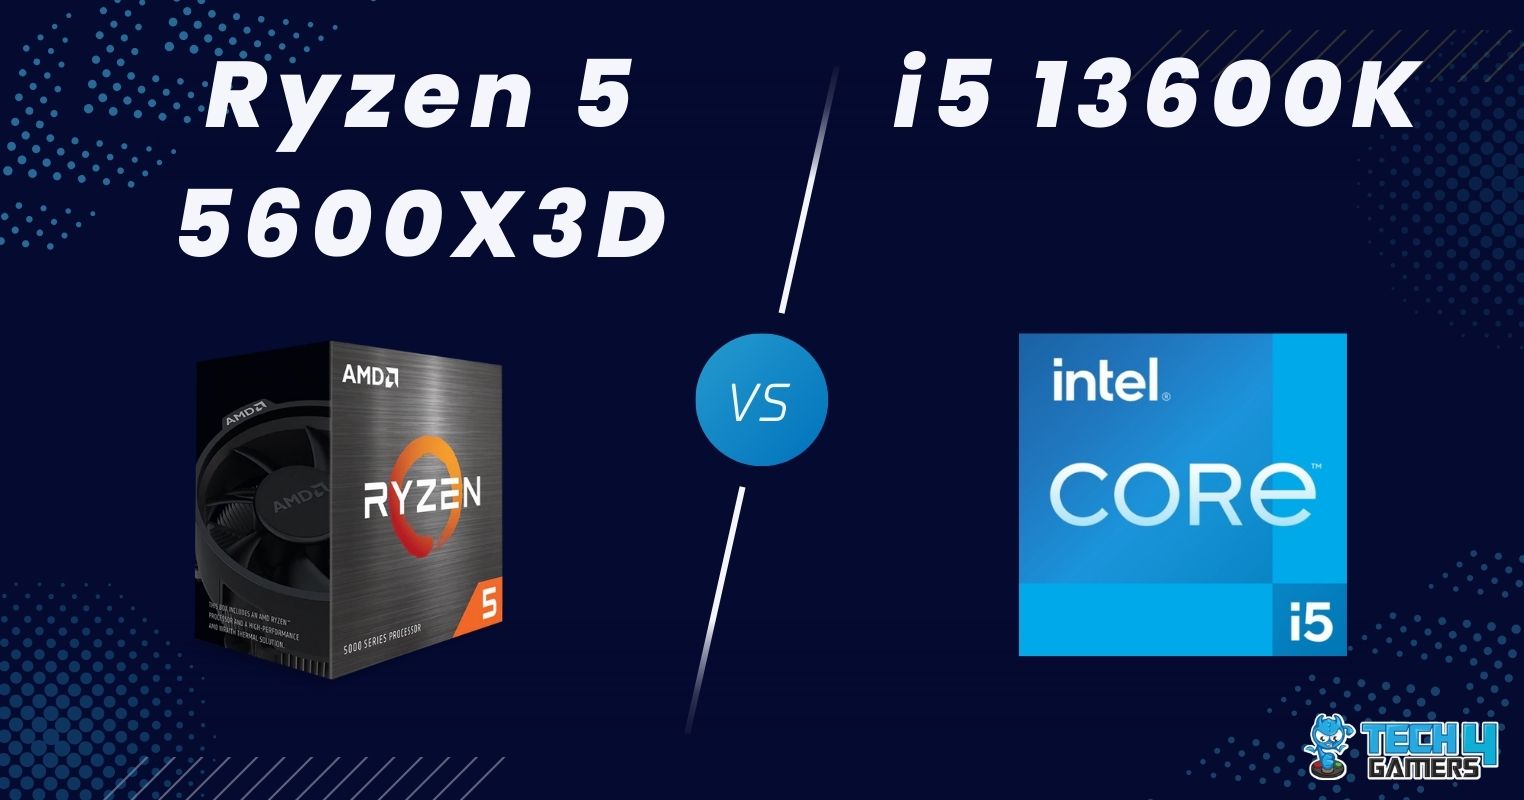 Intel Core i5-13600K: Better value than Ryzen 5 7600X? Yes and no